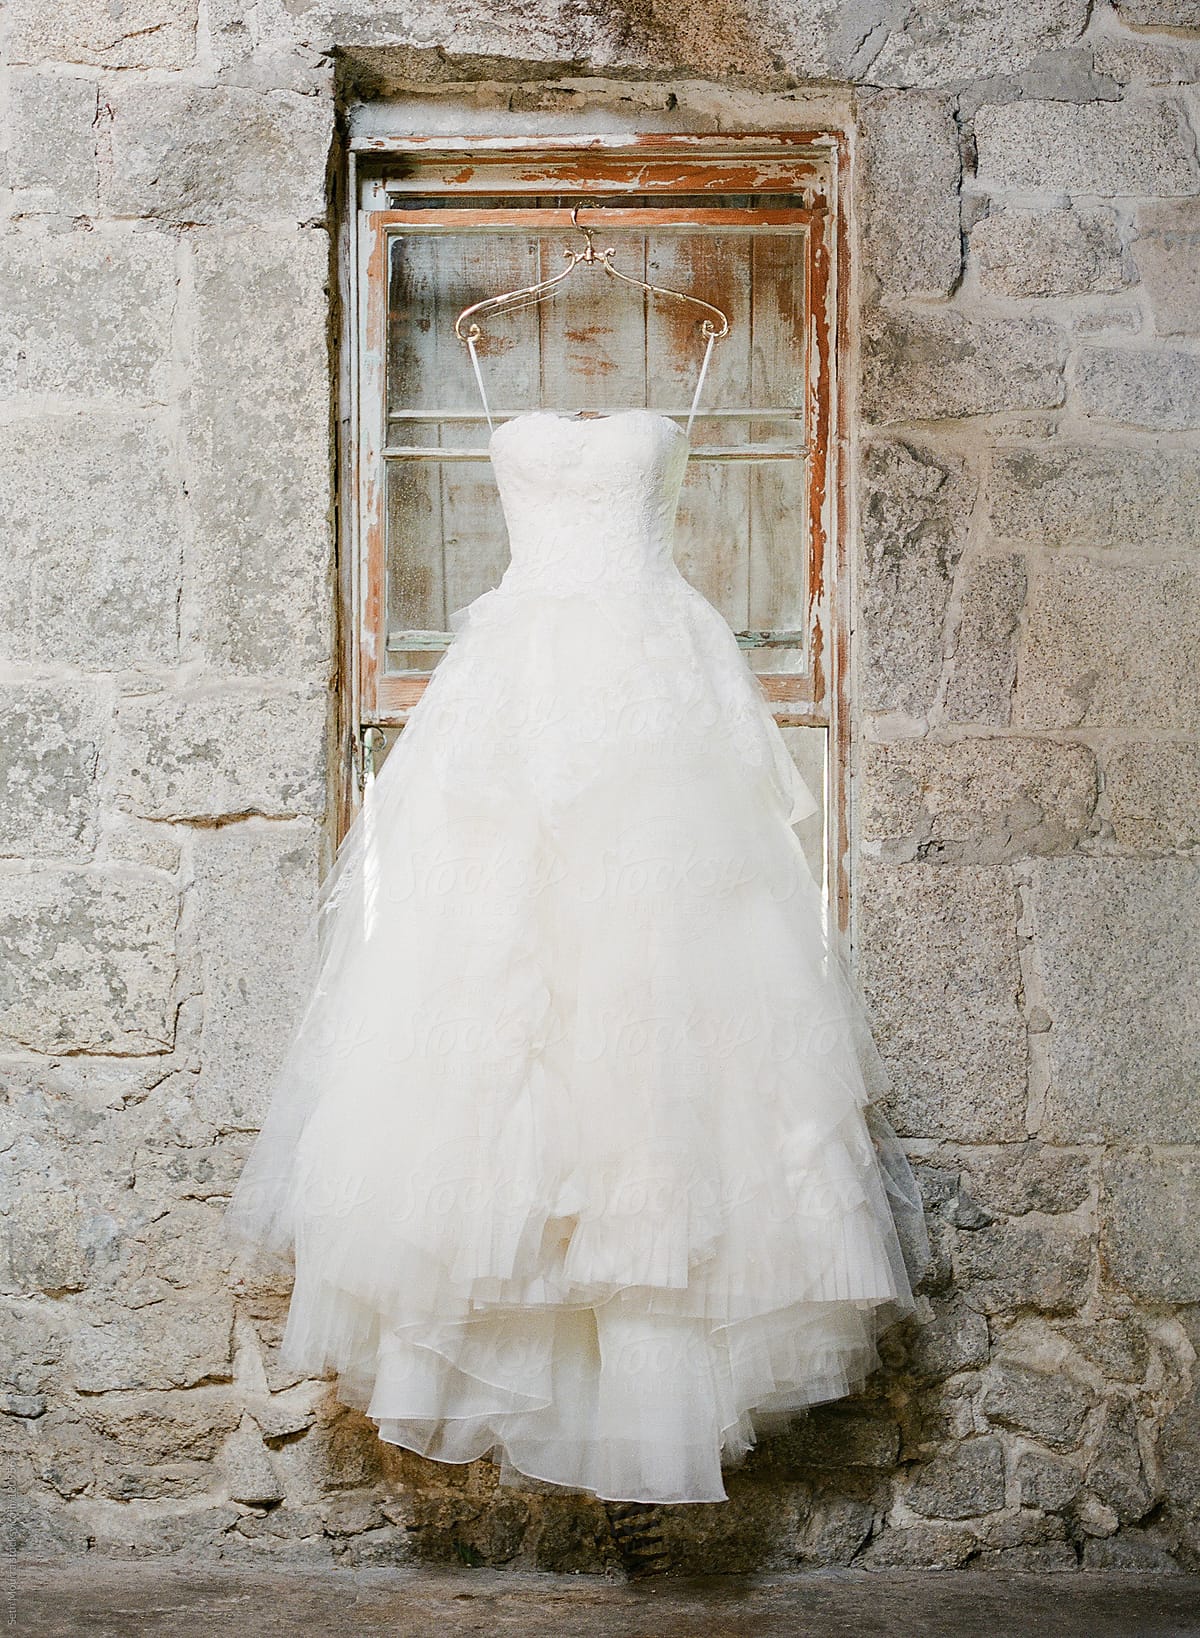 Hanging Wedding Gown by Seth Mourra